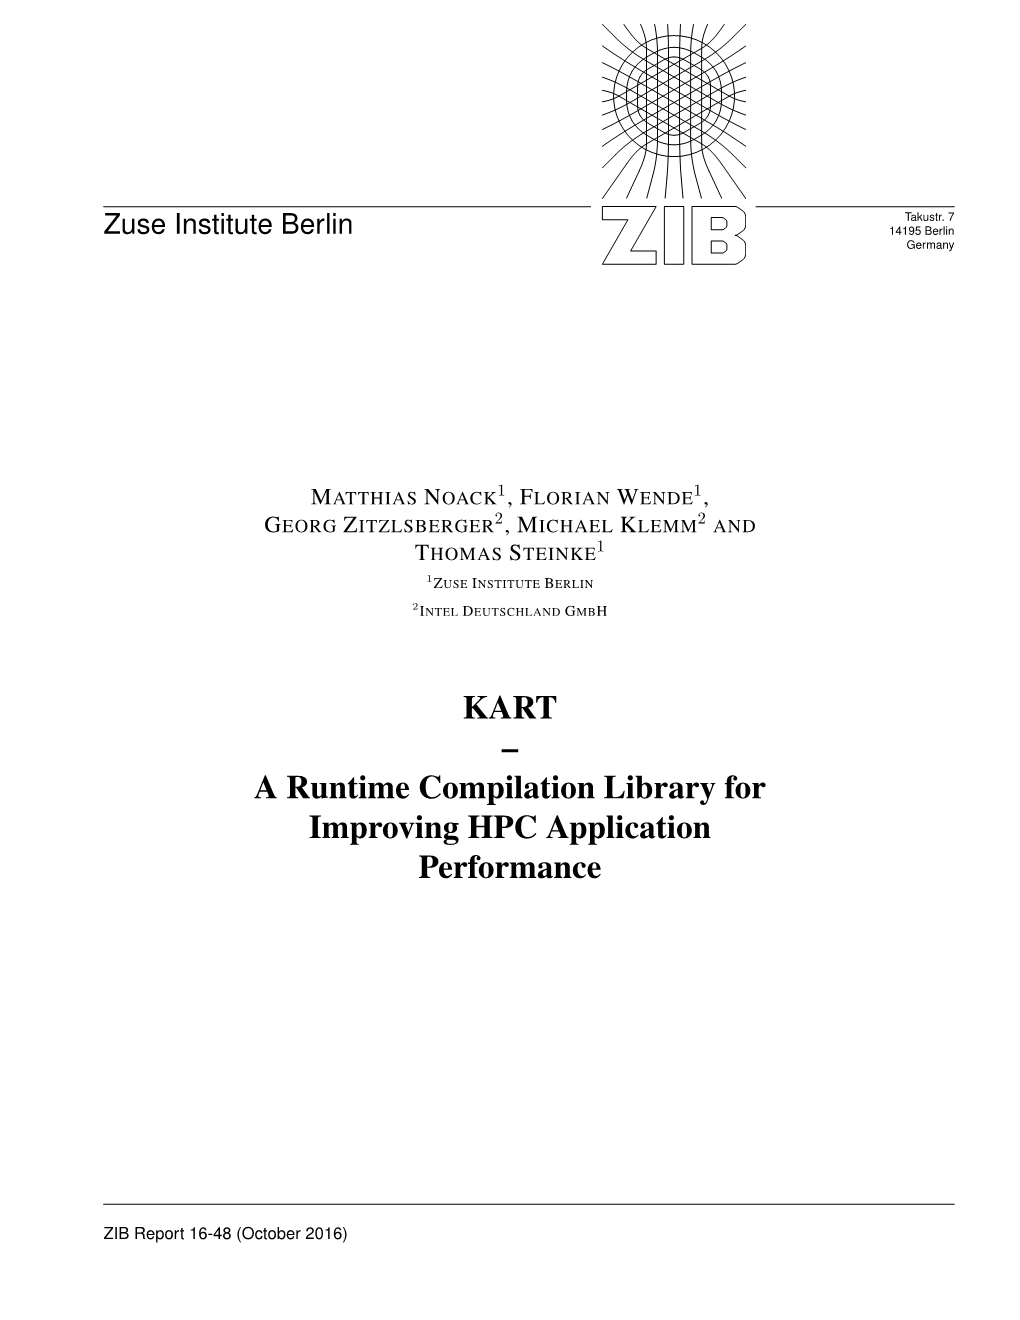 KART – a Runtime Compilation Library for Improving HPC Application Performance